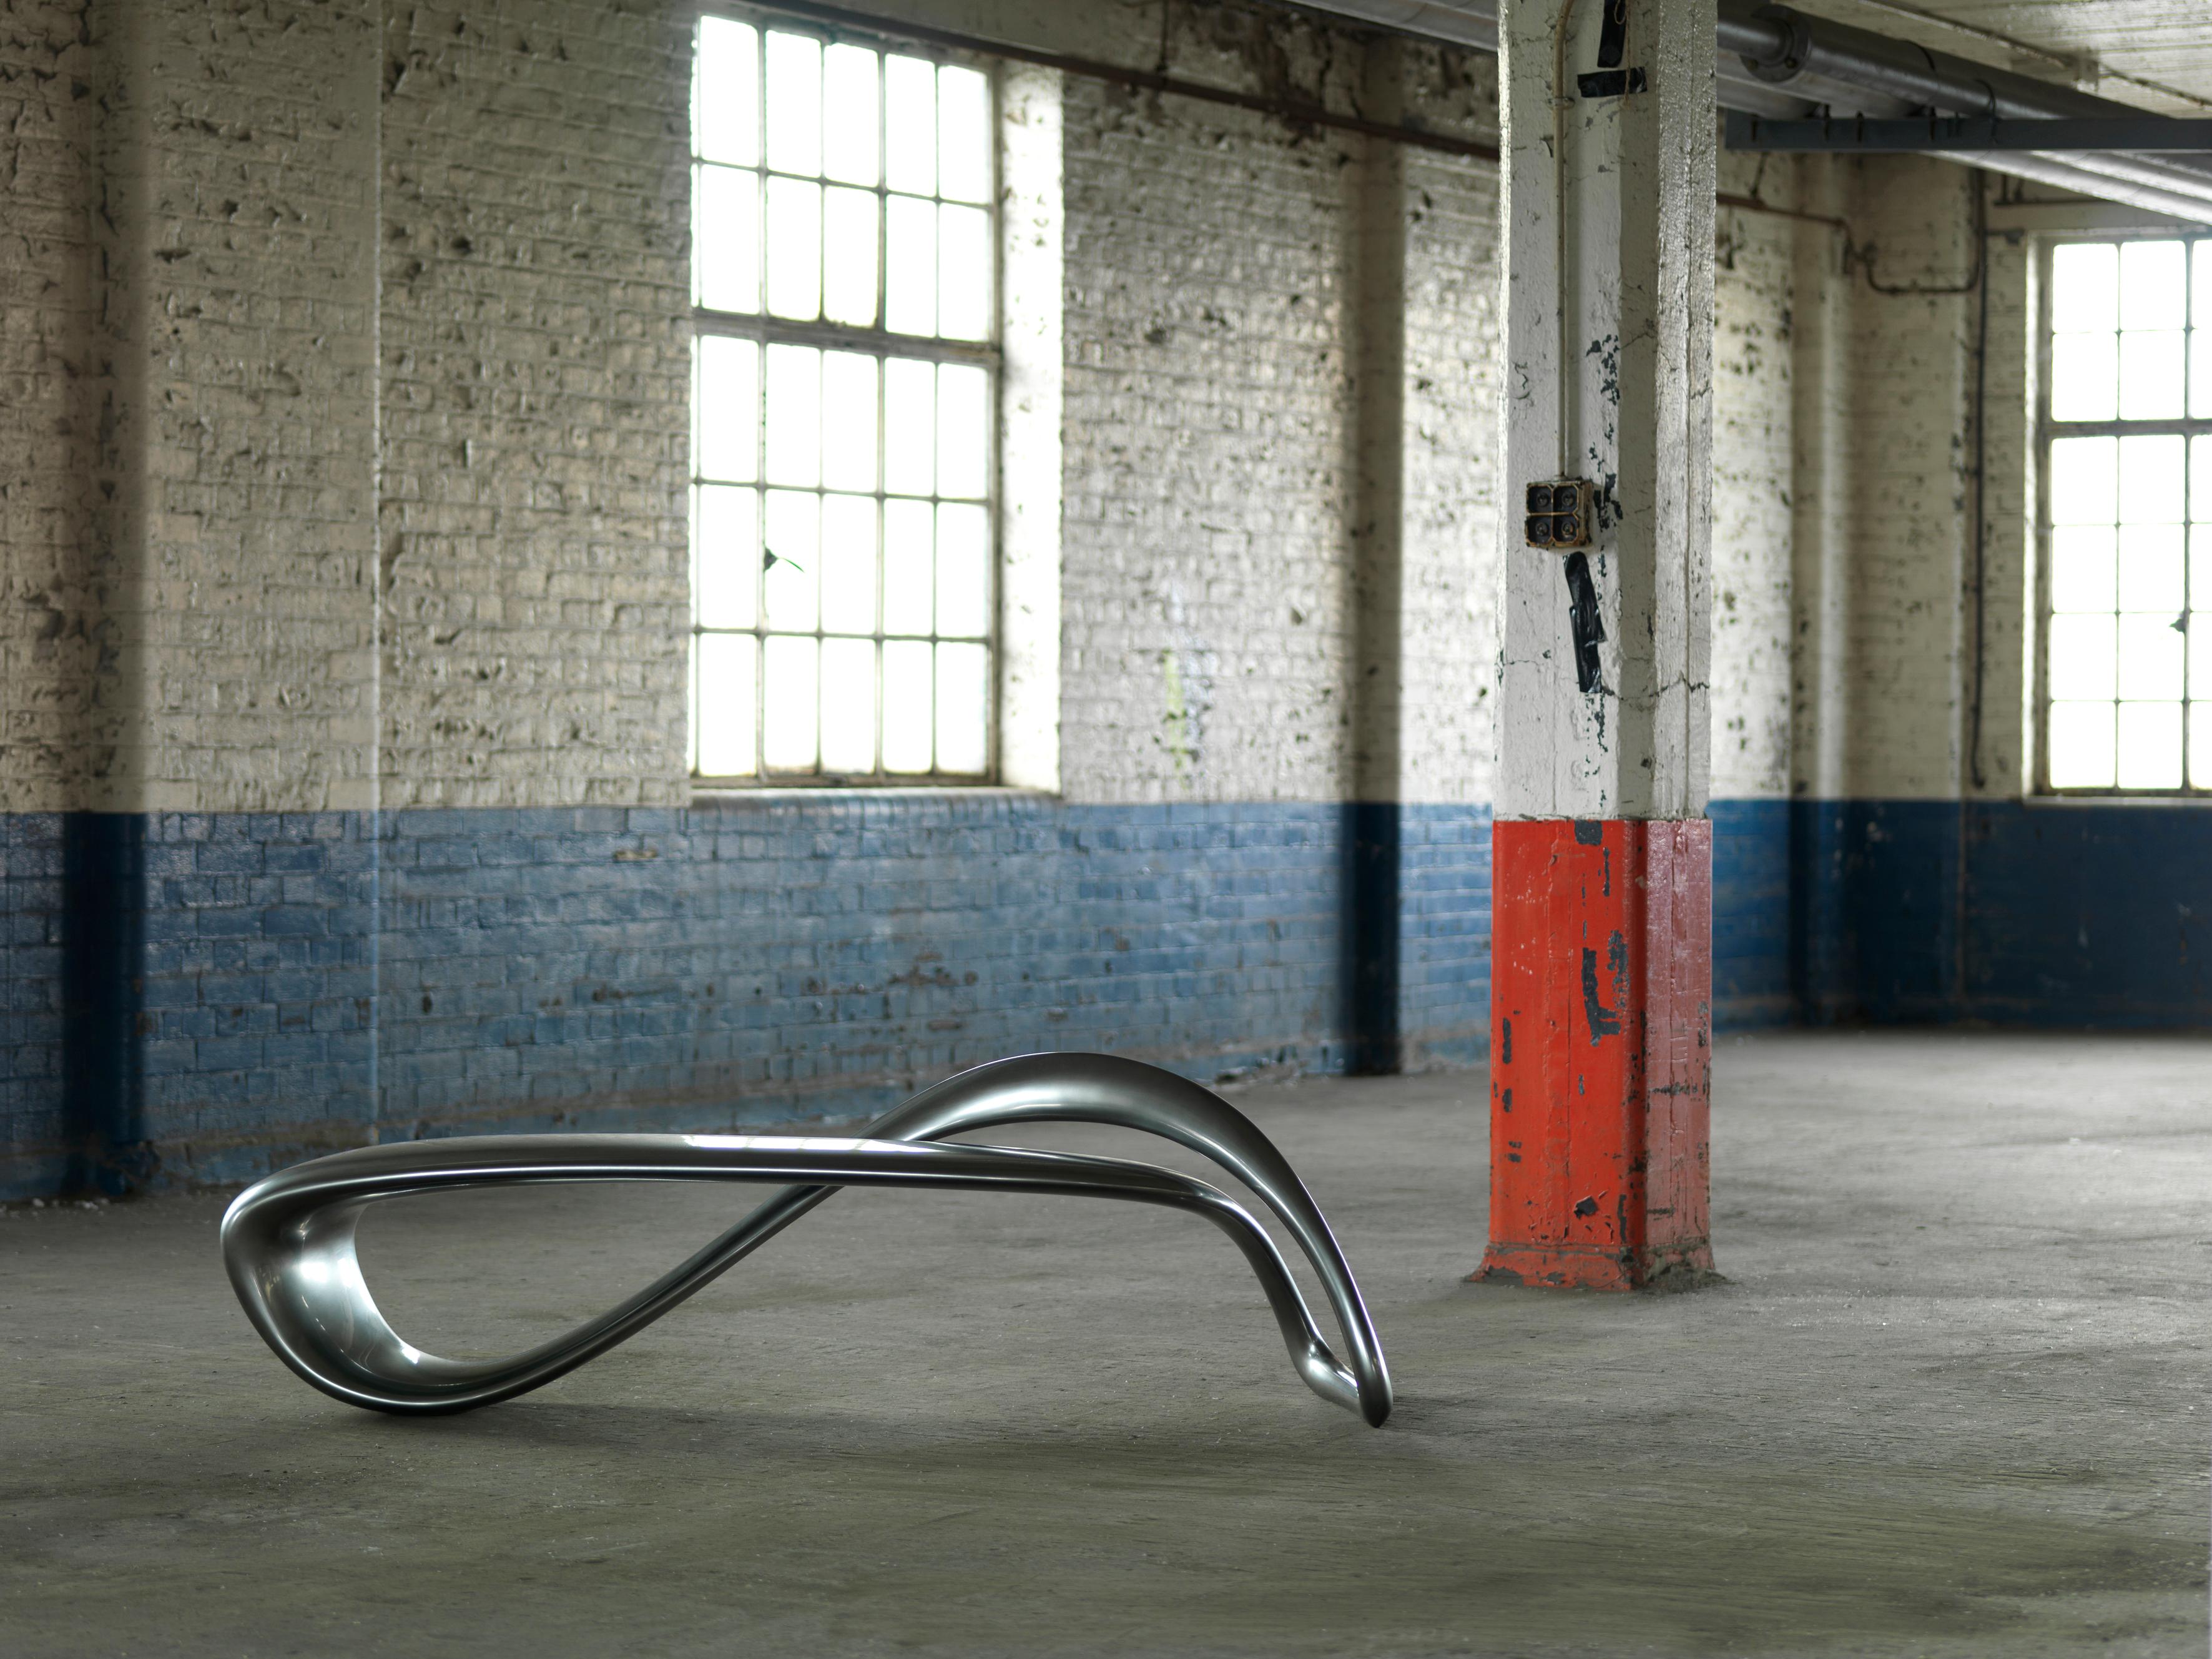 The result of exploring the possibilities of a singular line in 3D space, the E-Turn is a continuously morphing ribbon that twists and turns from seat to structure before overlapping and returning again in the configuration of a bench. The endless